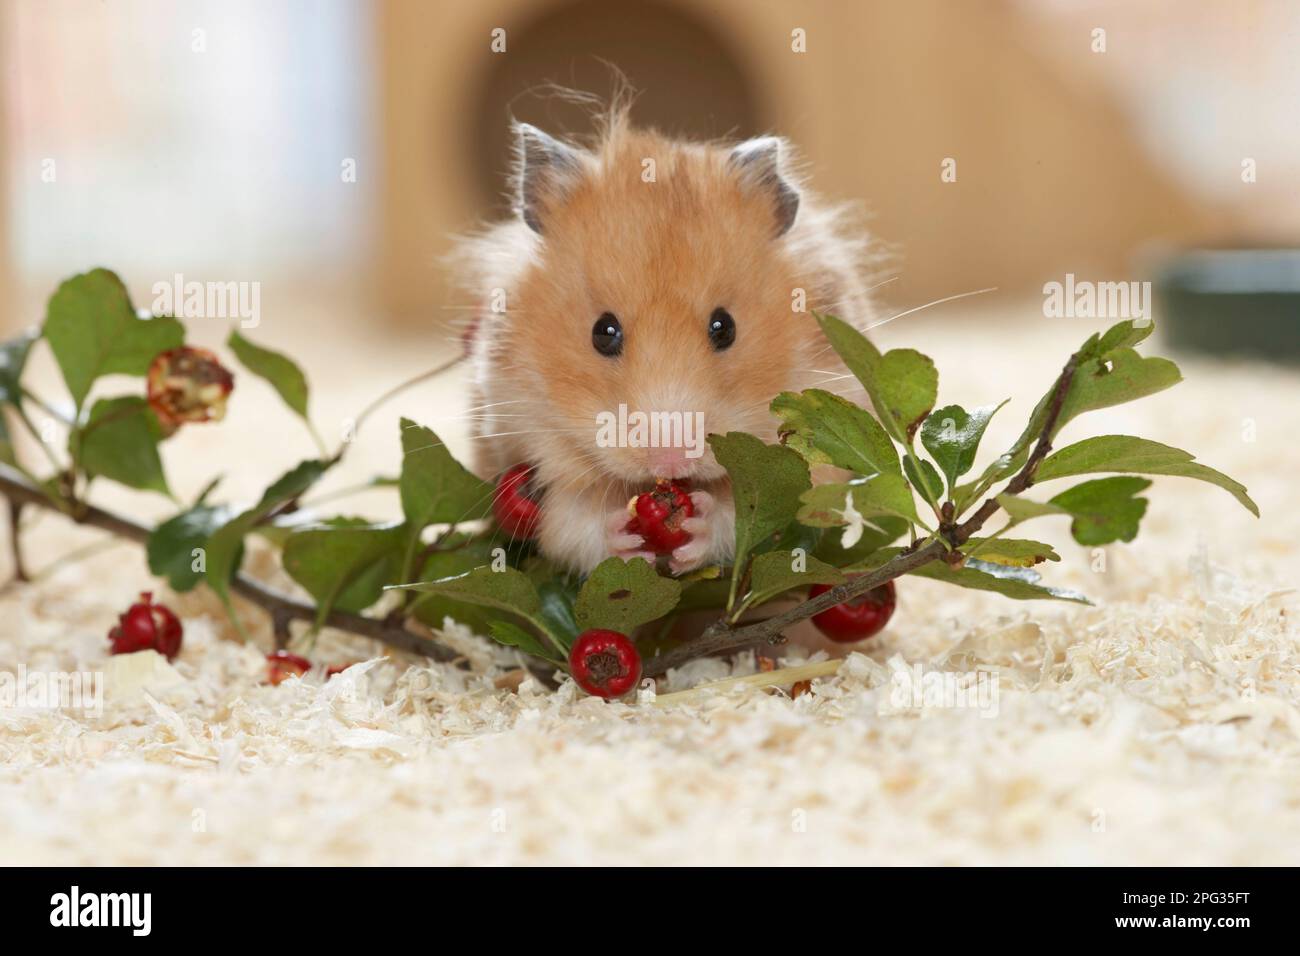 A pet golden hamster eating Hawthorn berries. Germany Stock Photo